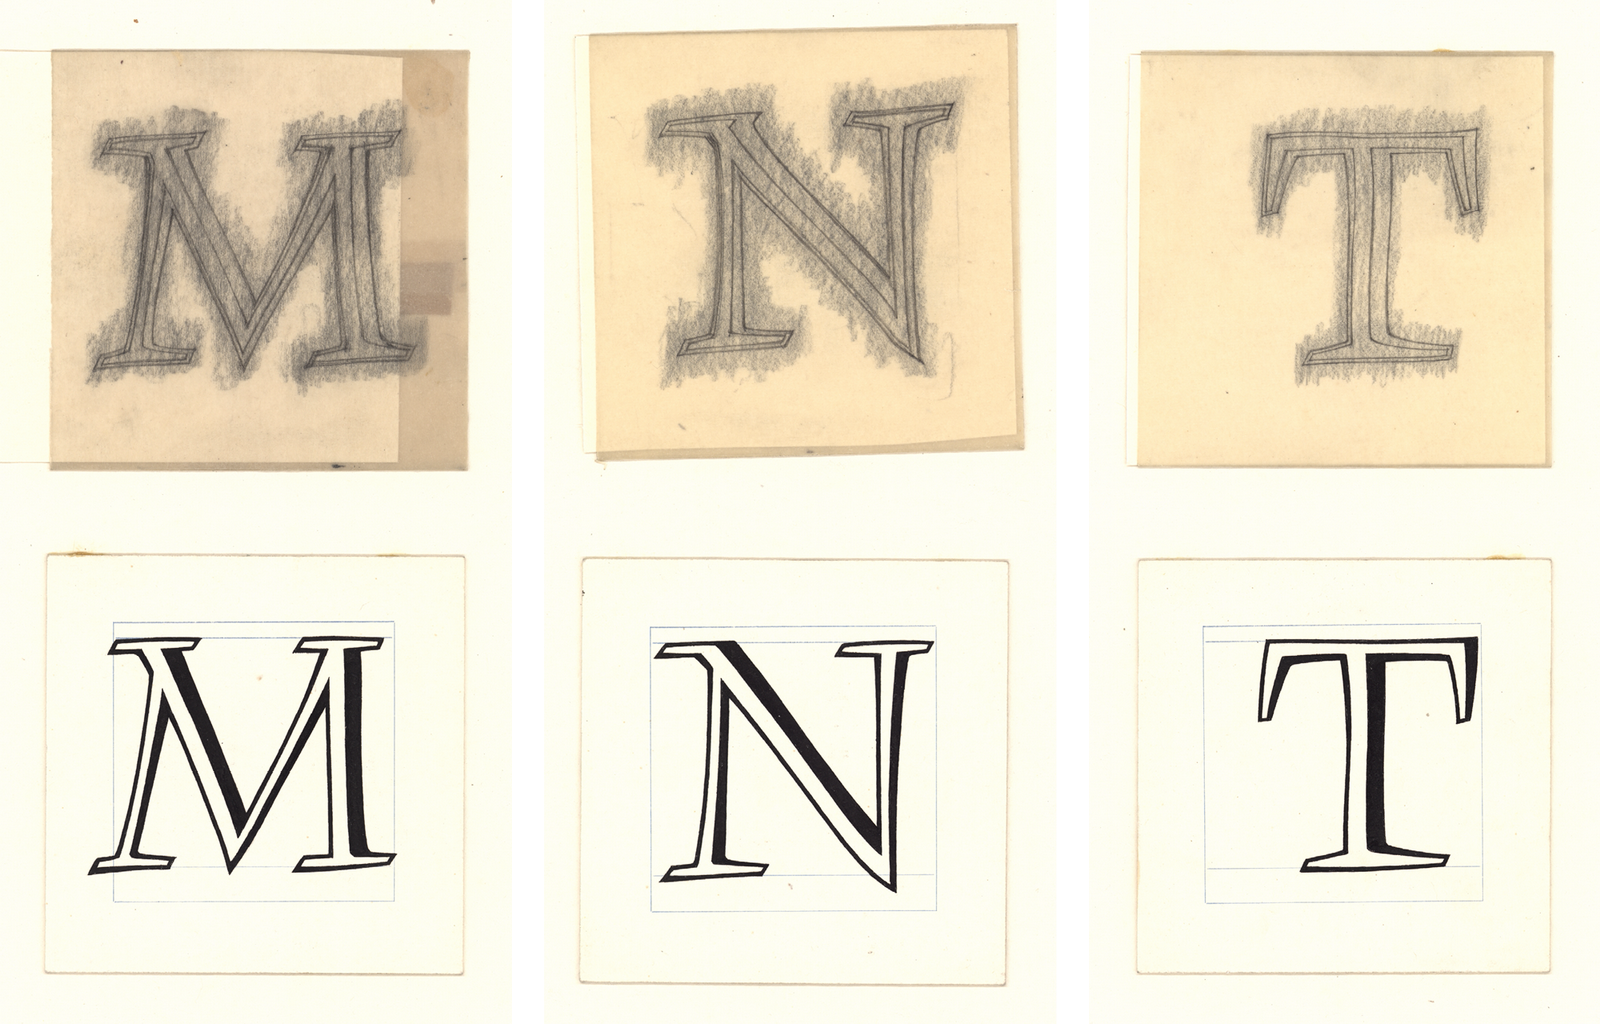 The original pencil and ink typeface designs for Monument from the estate of Oldřich Menhart, 1950. Source: National Museum Library. [2]